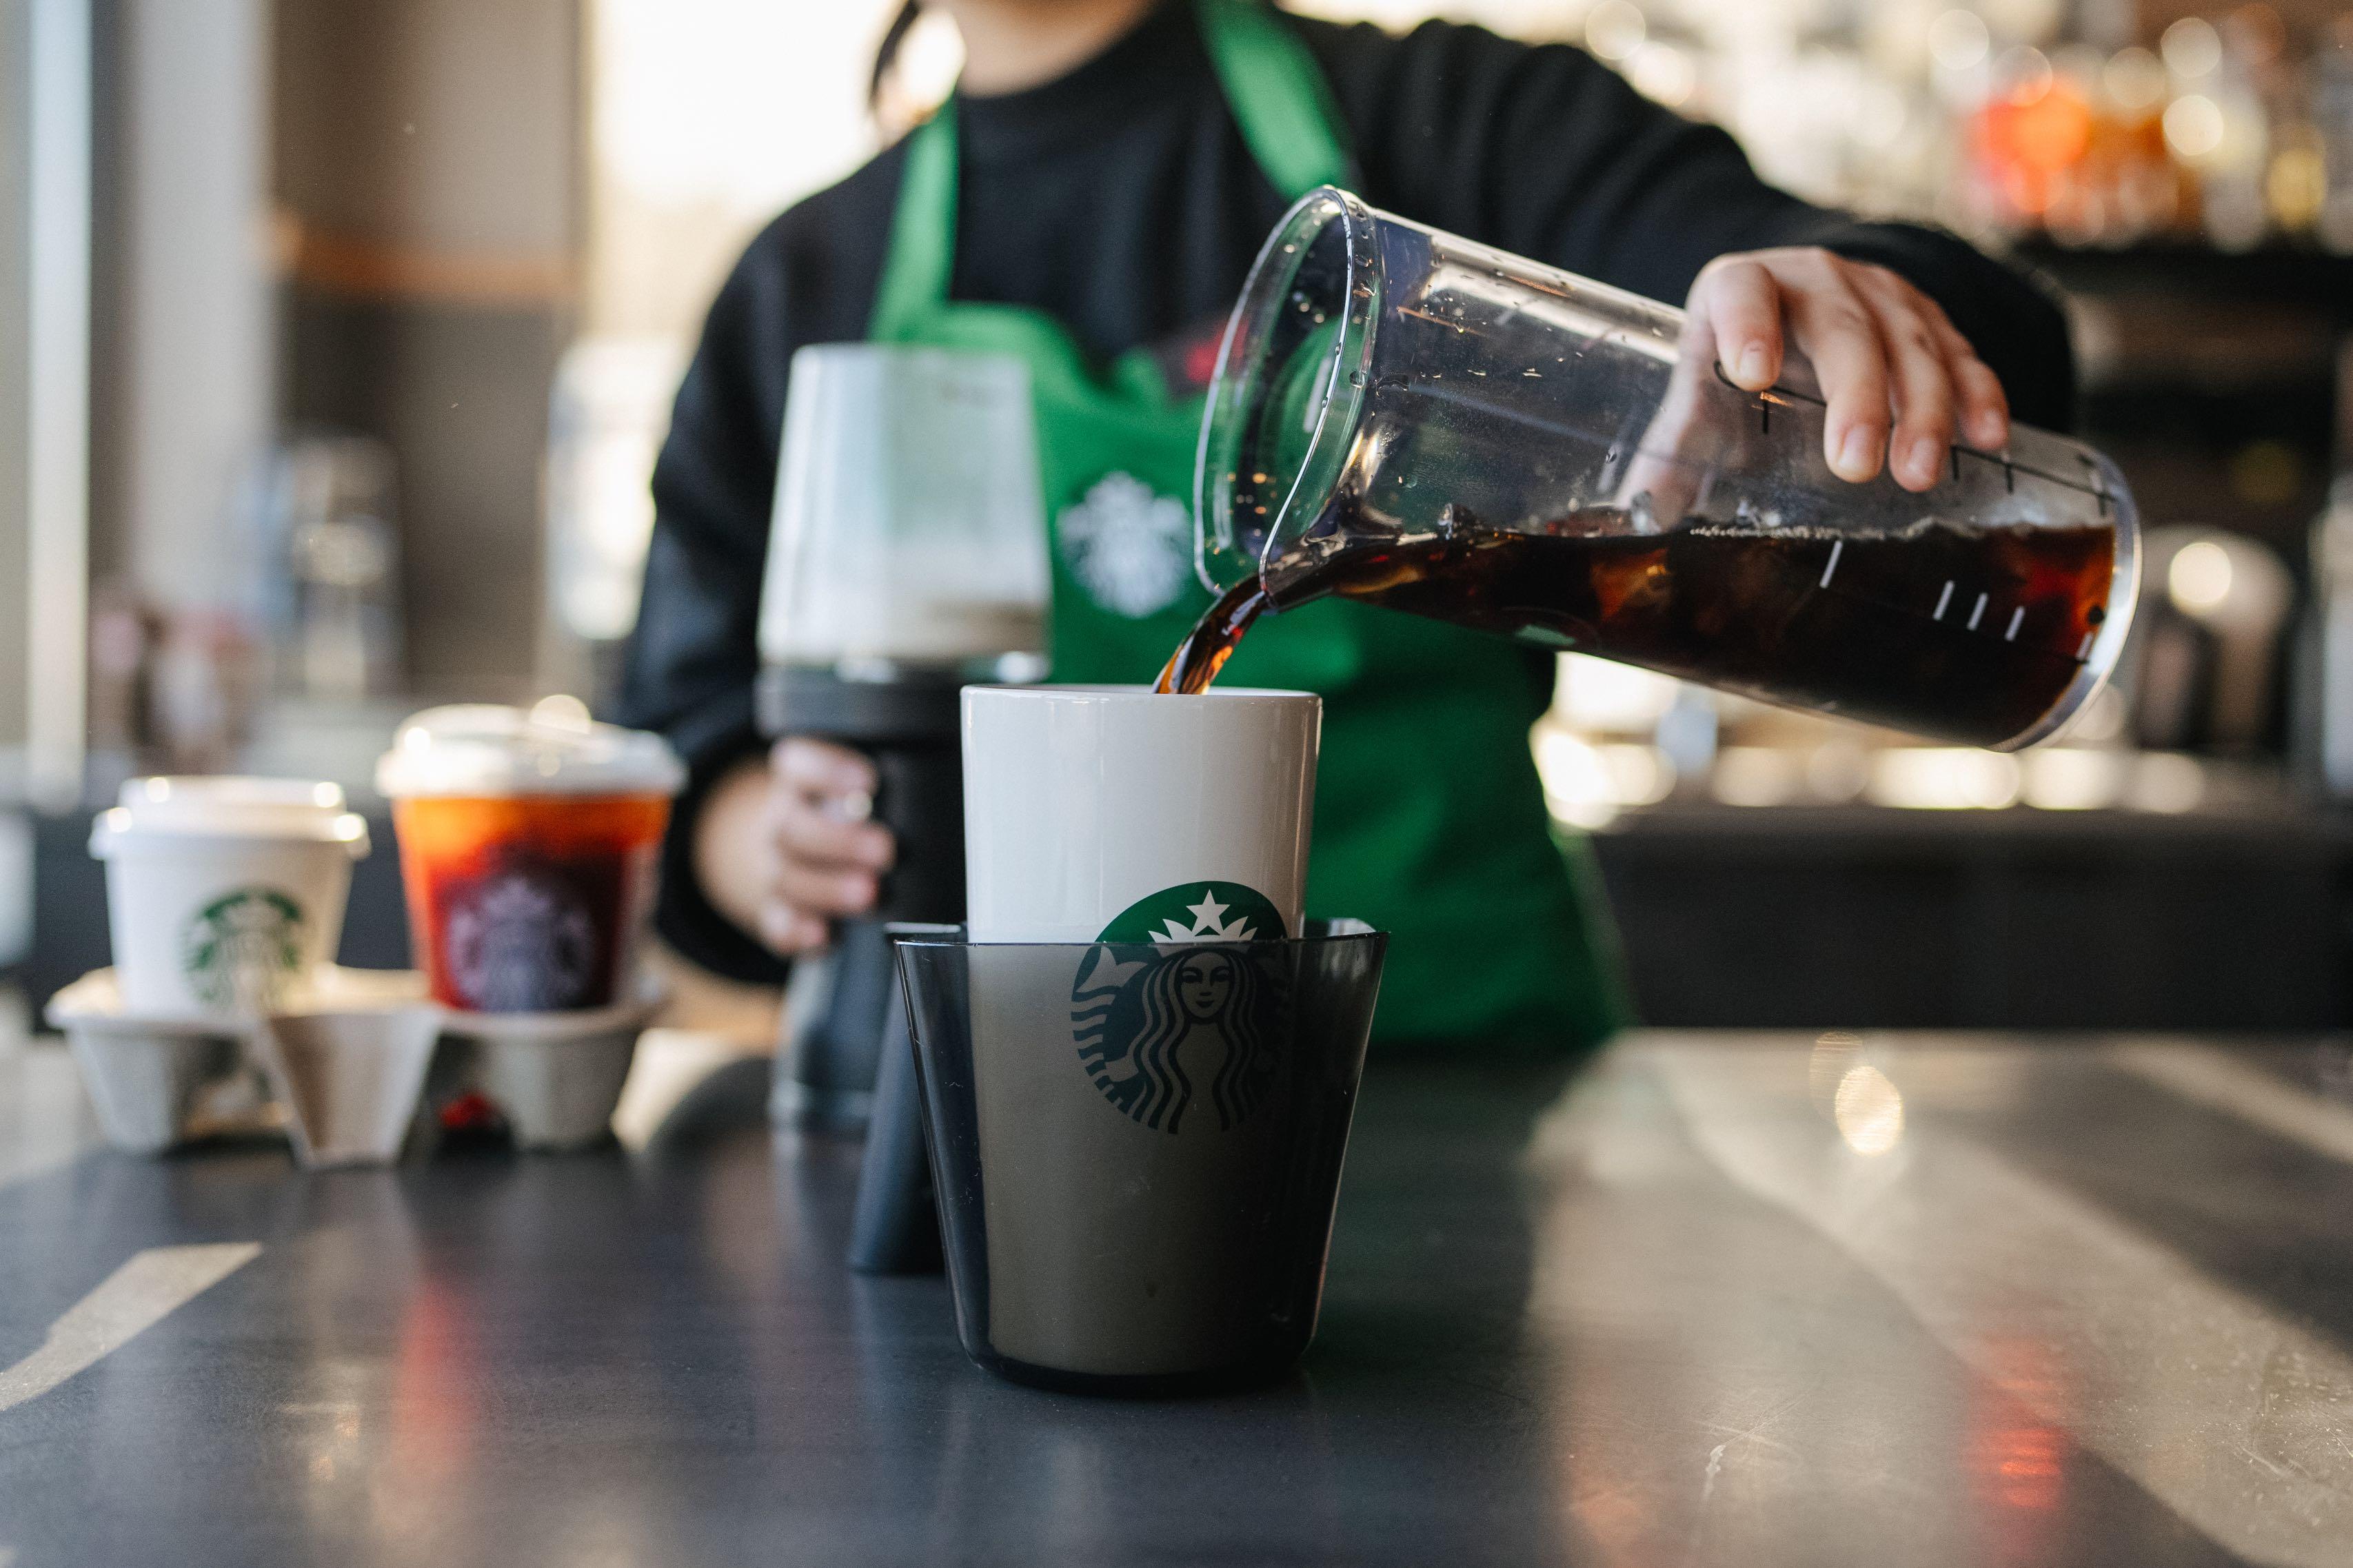 Starbucks Enables Use of Reusable Cups for Drive-Thru and Mobile